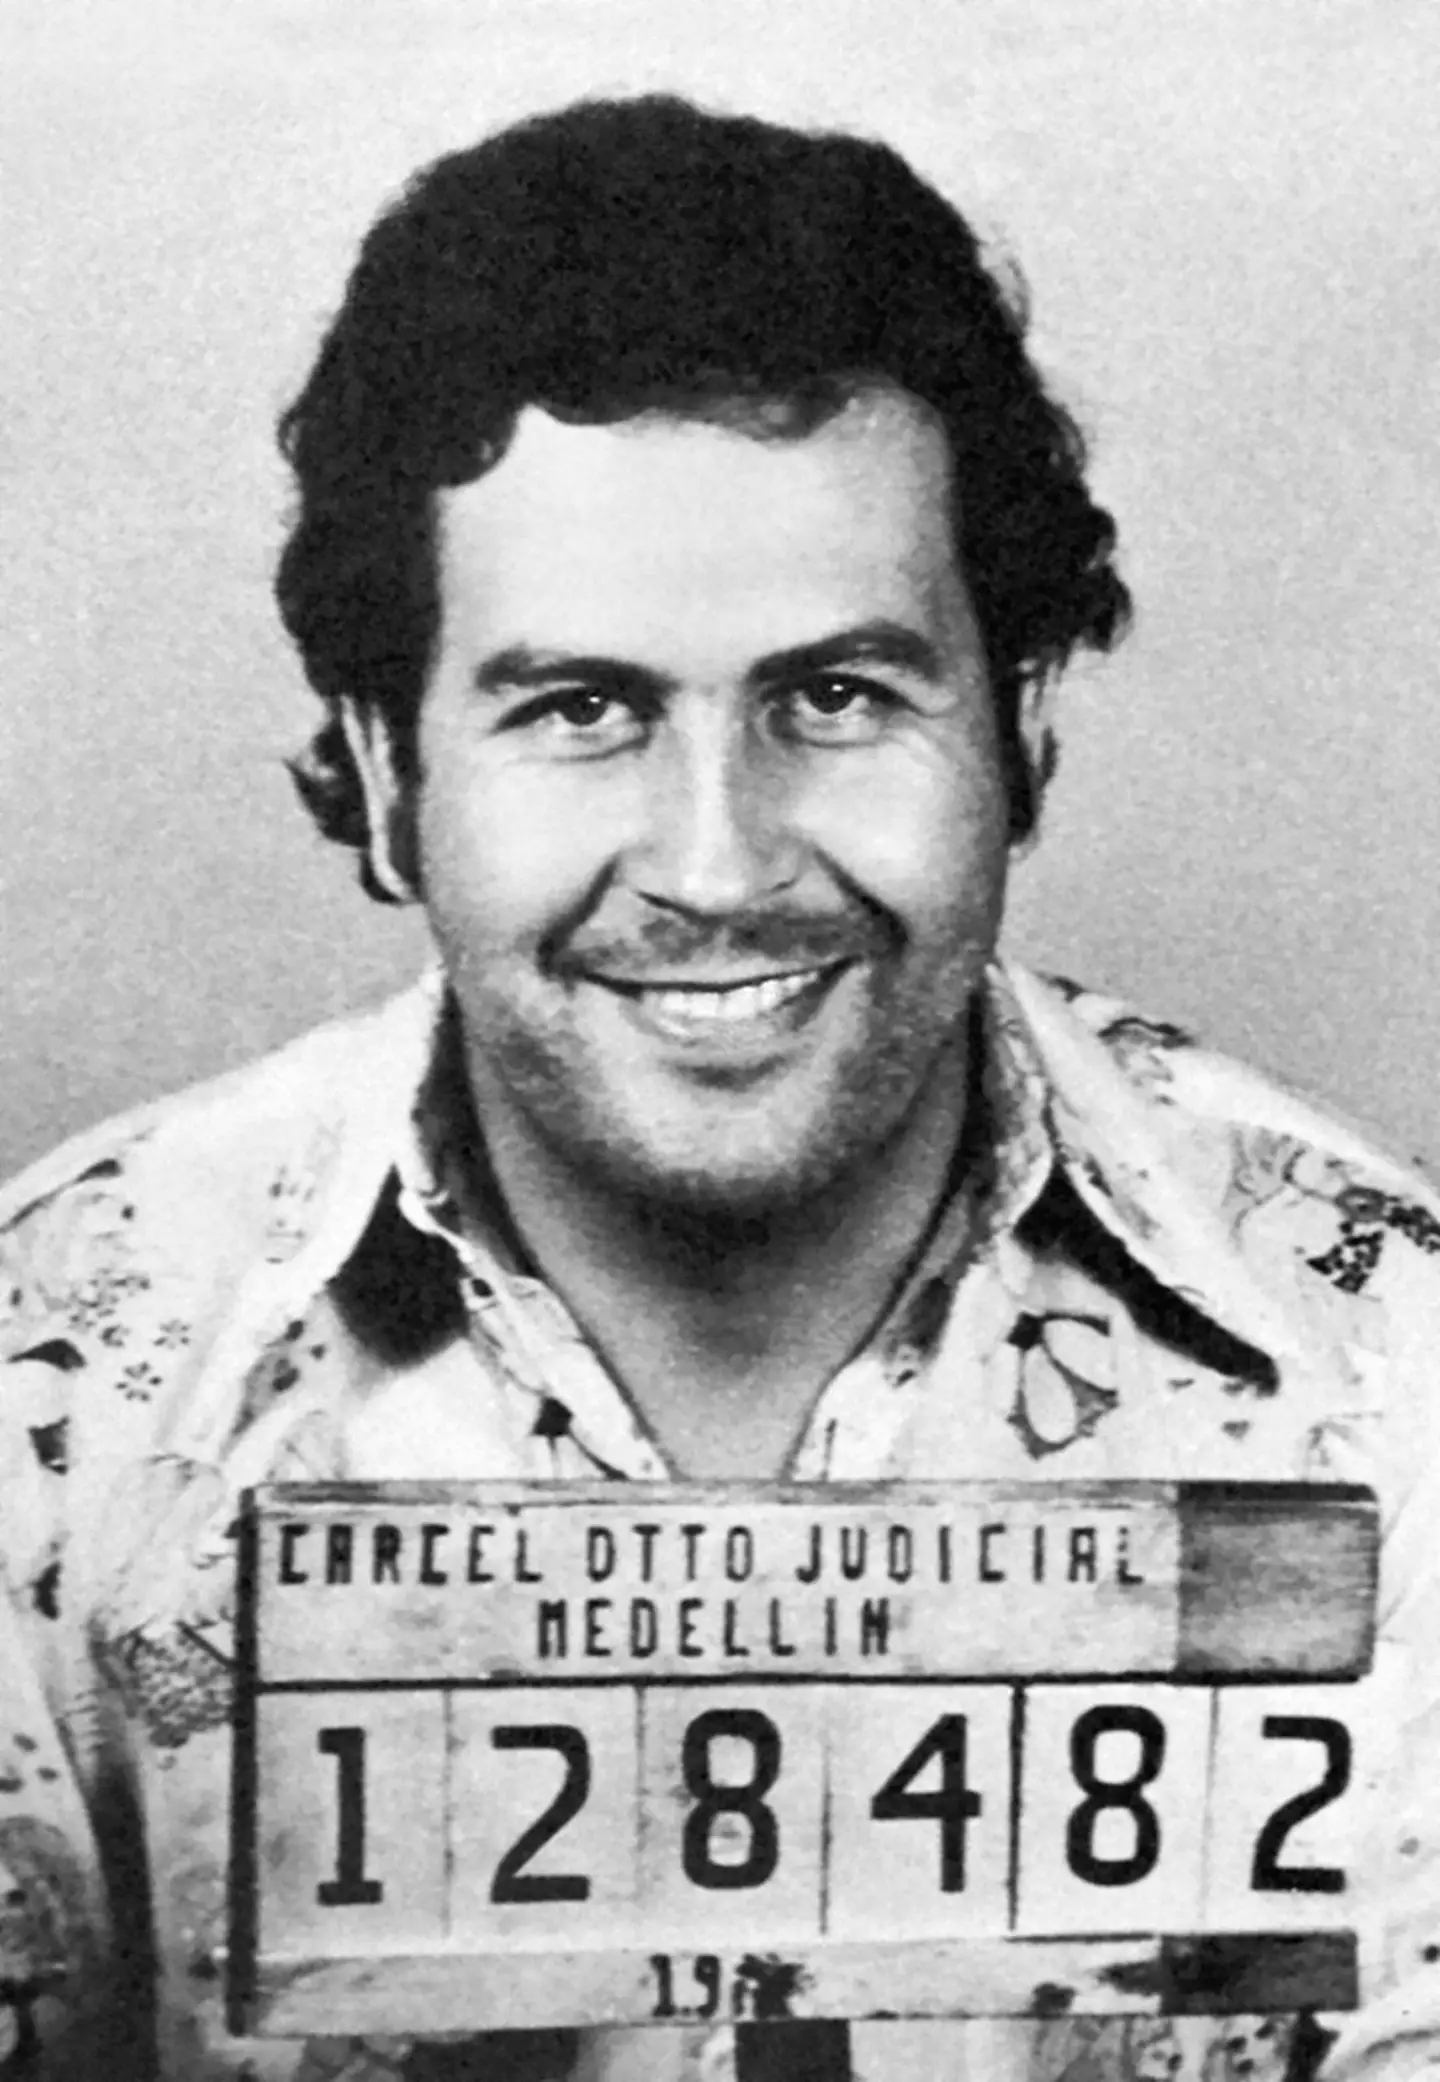 Drug lord Pablo Escobar was killed by police in 1993.